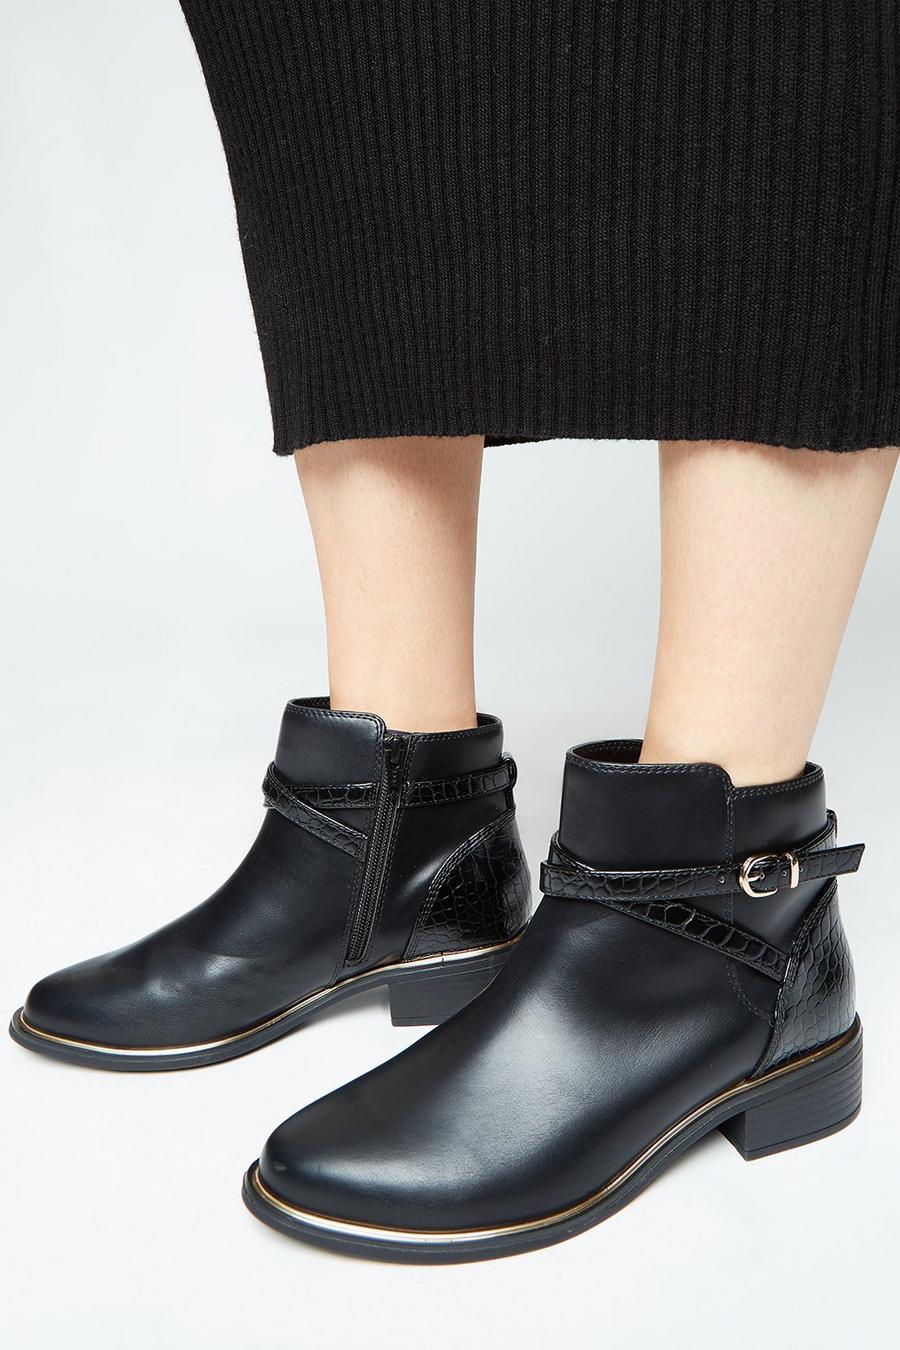 Avery Cross Strap Ankle Boot